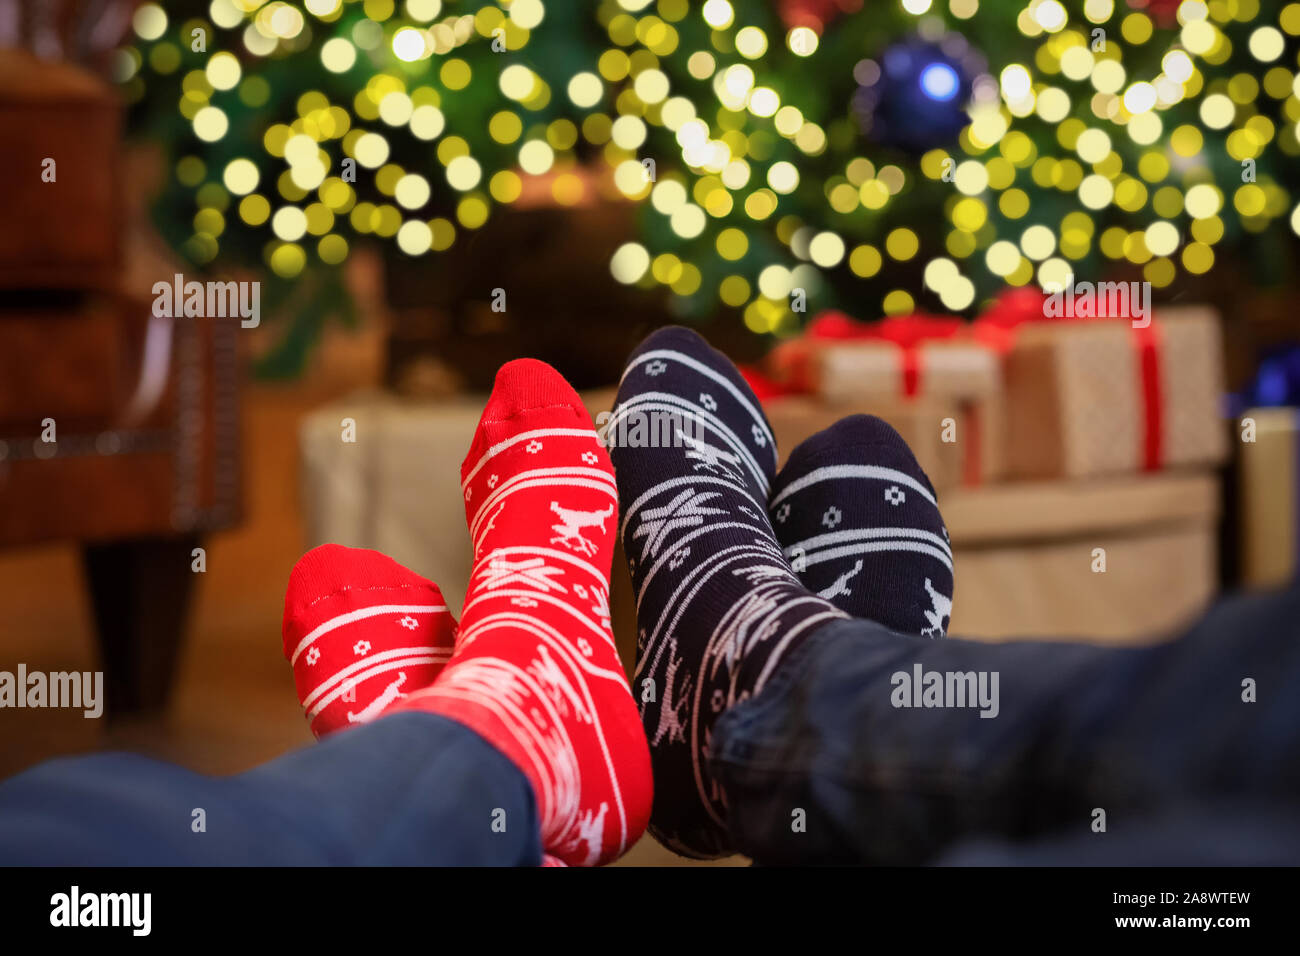 Two pair of feet in colorful ornamented Christmas socks Stock Photo